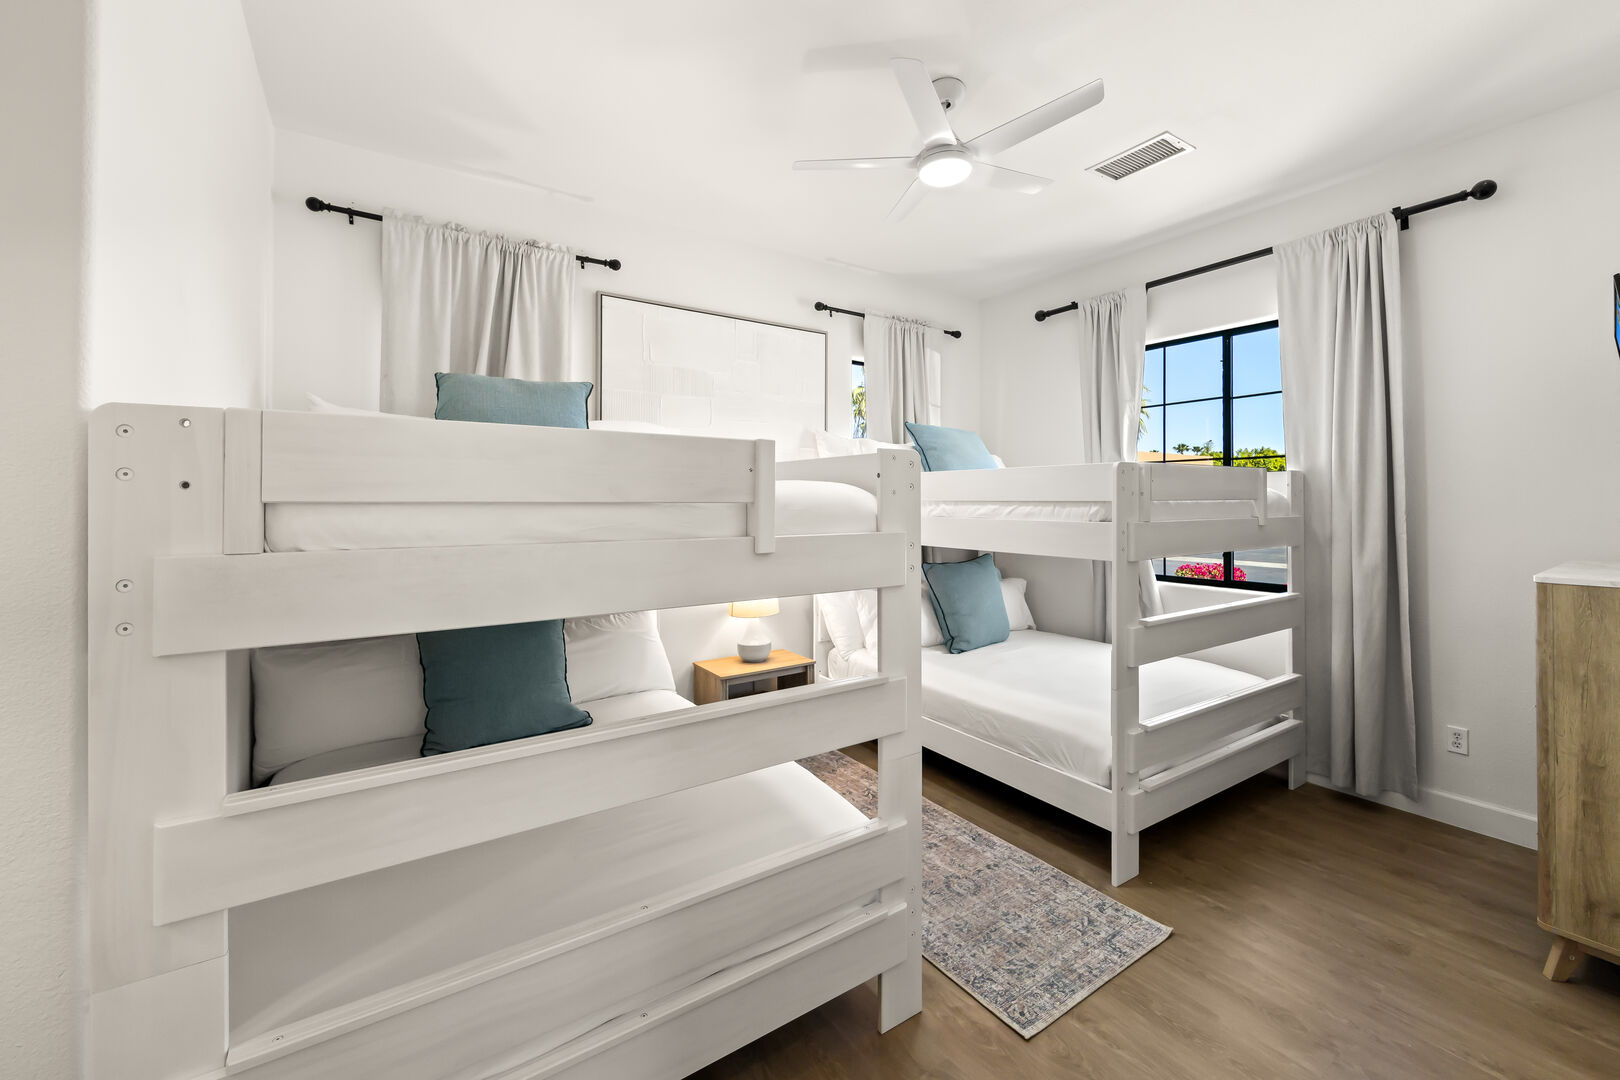 Suite 2 features 2 Queen Over Queen Bunk Beds, a 43-inch Insignia TV, and a walk-in closet.